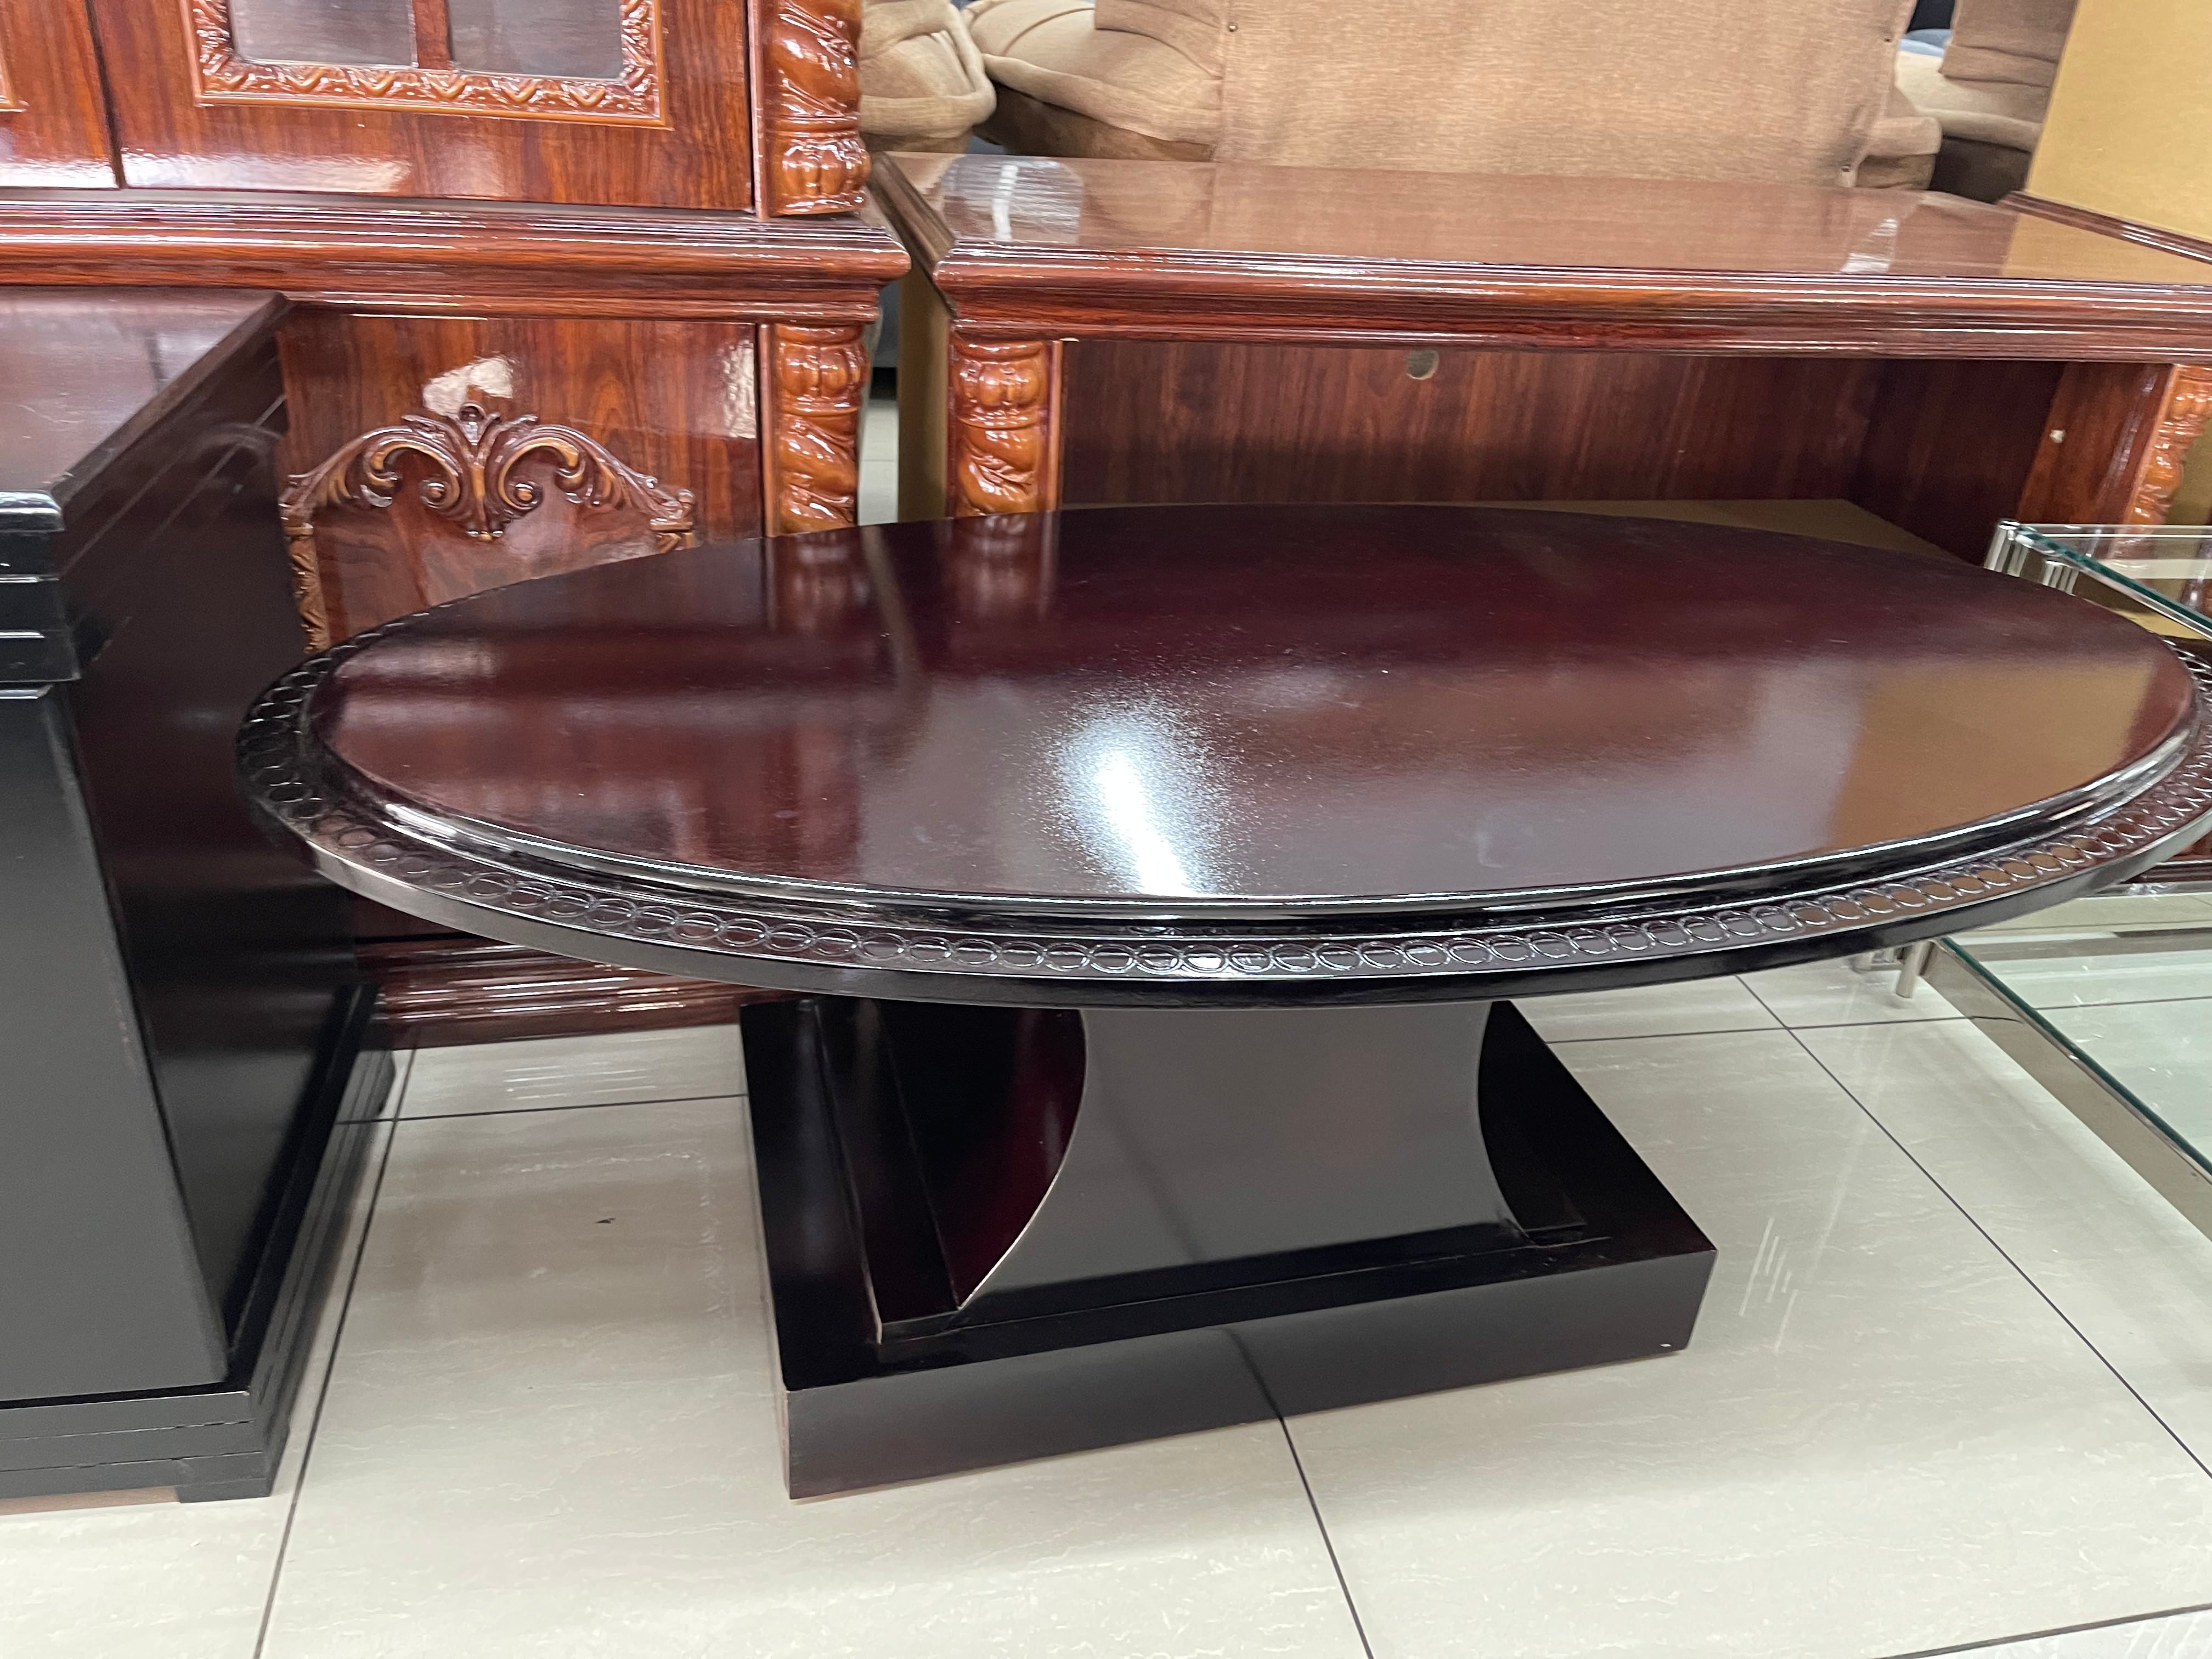 Oval Coffee Table